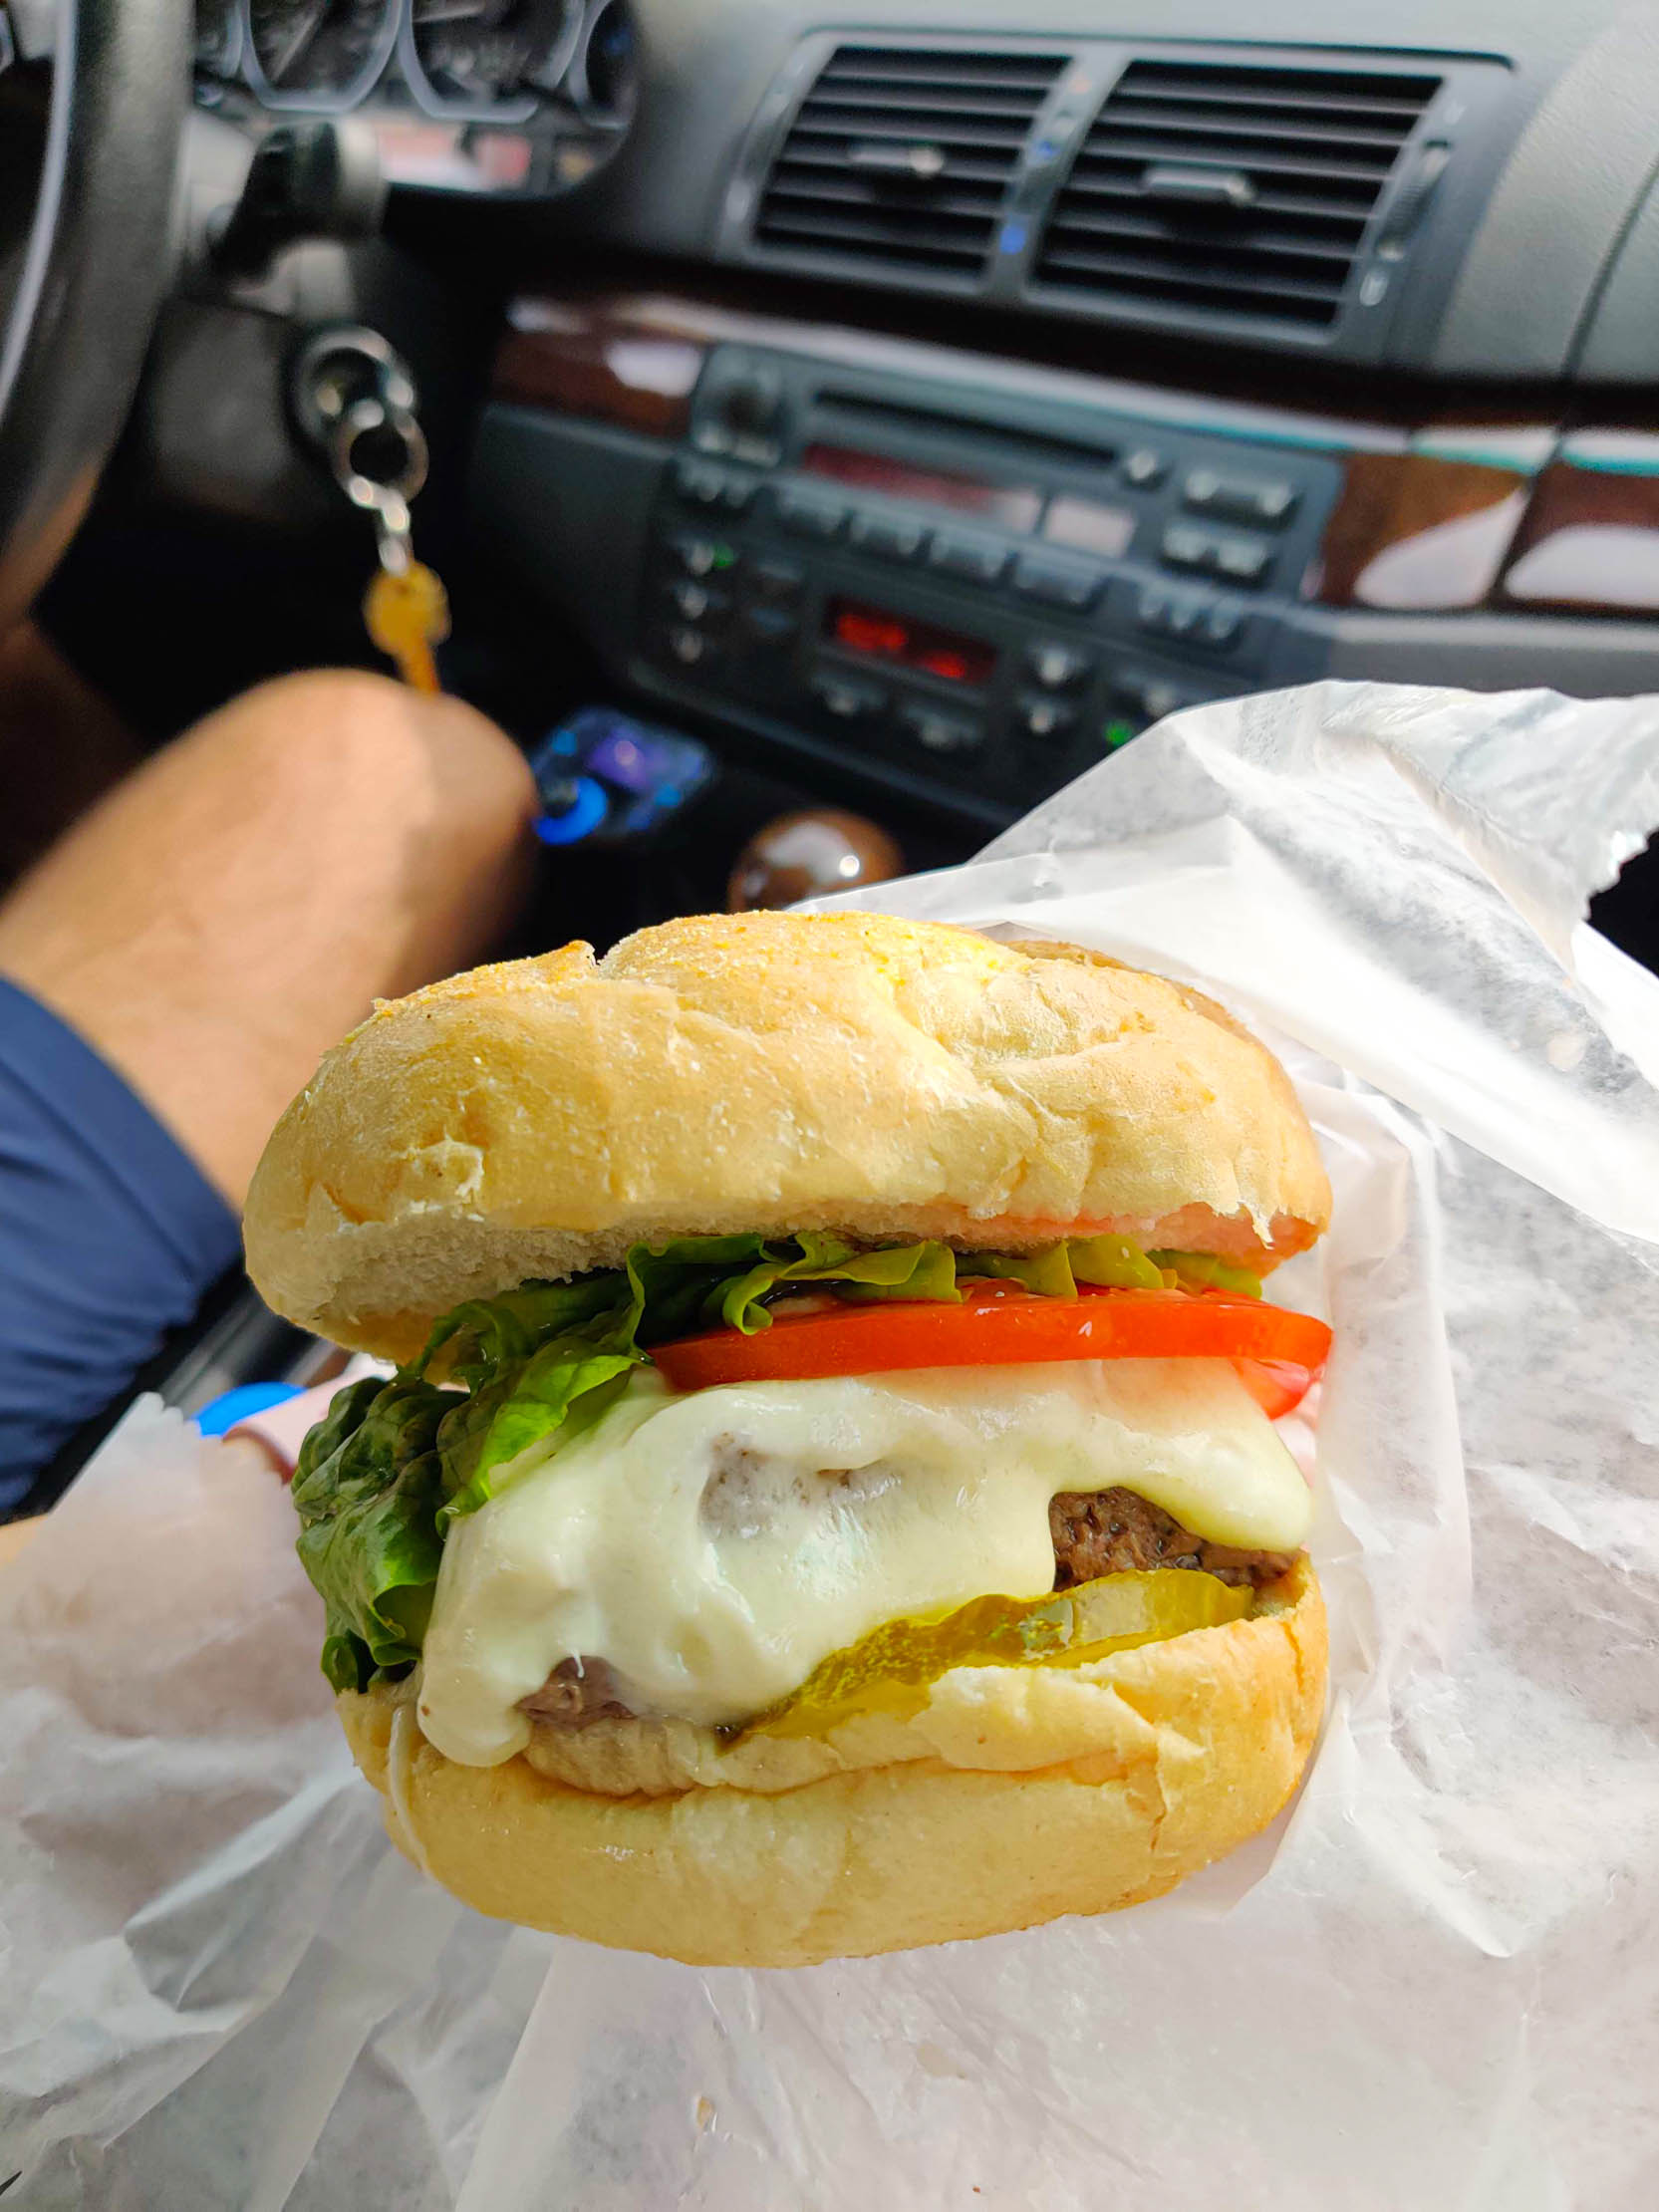 Eat a Steamed Burgers from Ted's Restaurant in CT for National Hamburger Month